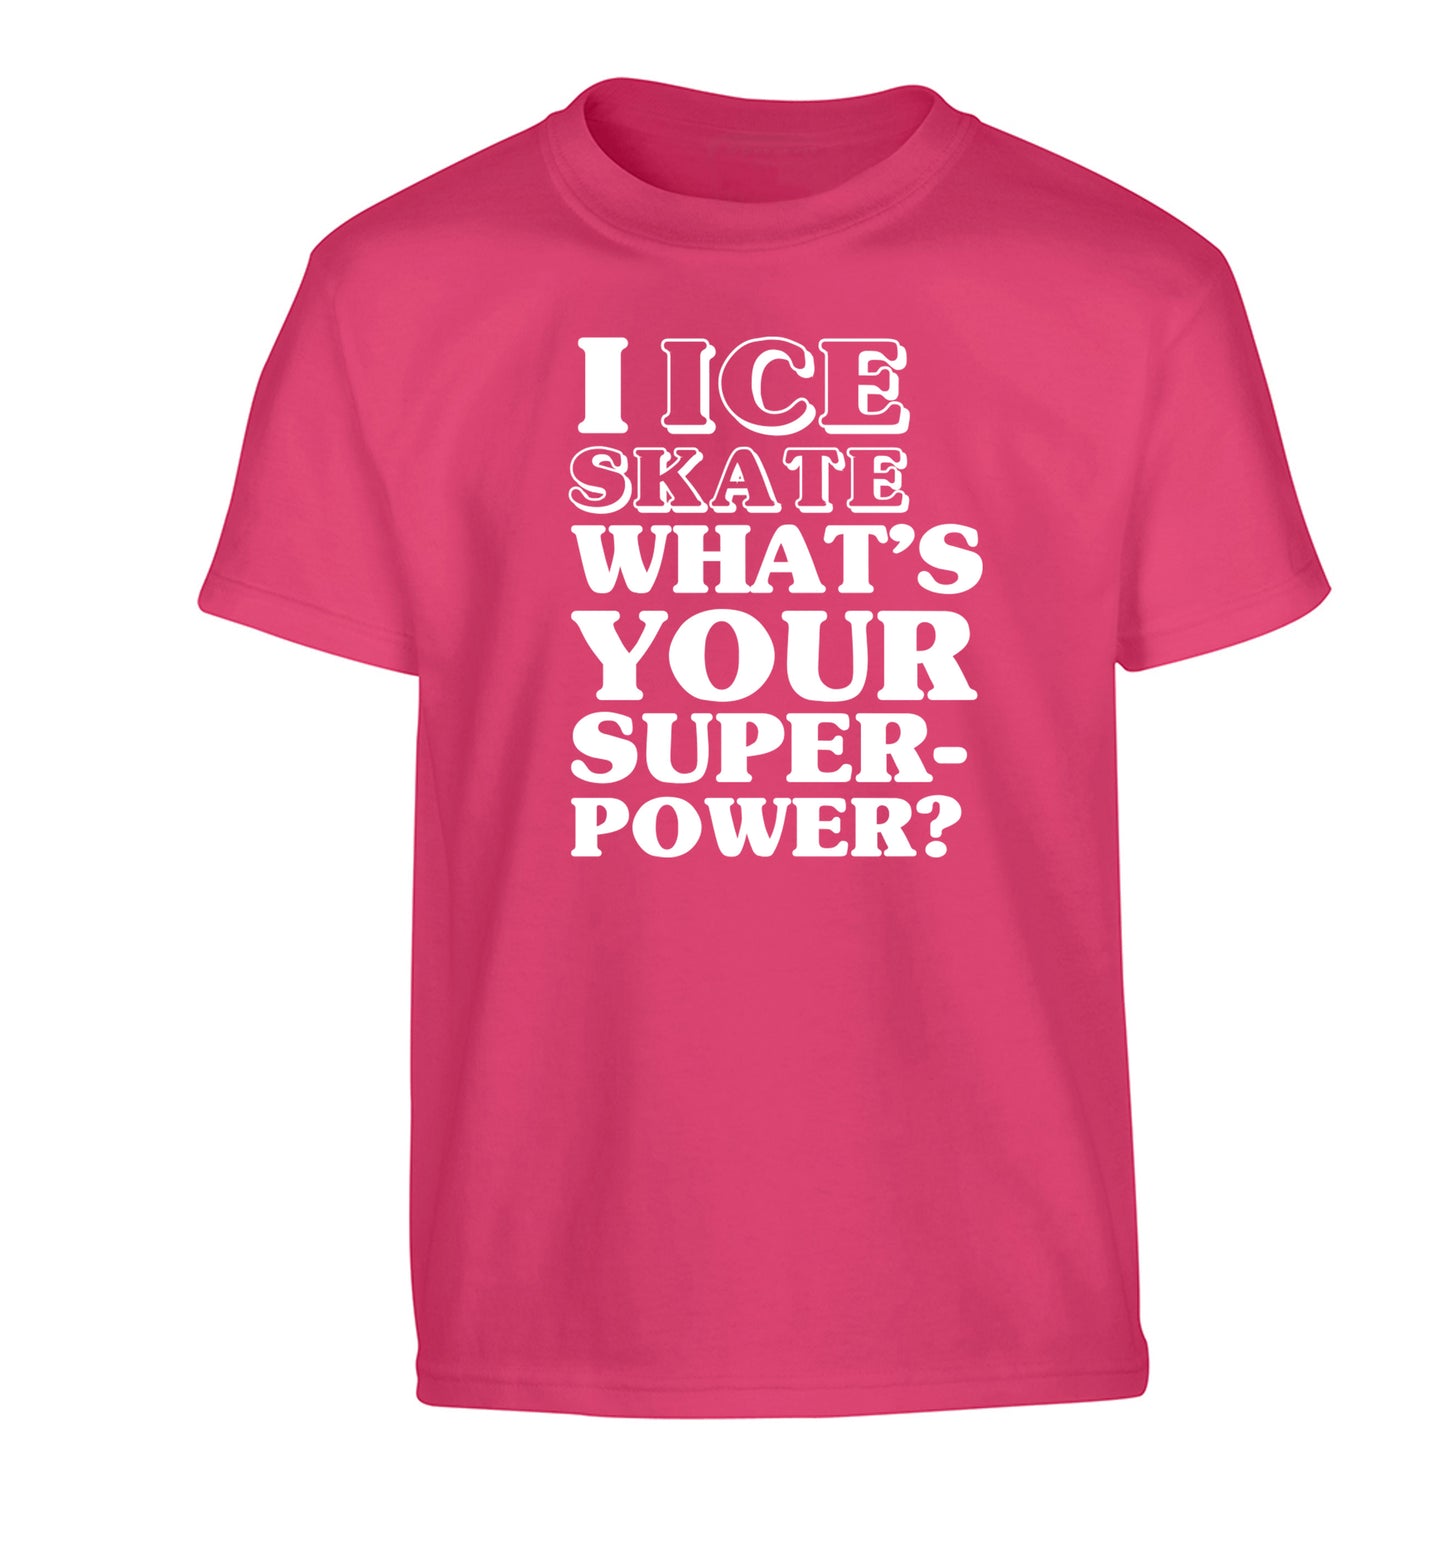 I ice skate what's your superpower? Children's pink Tshirt 12-14 Years